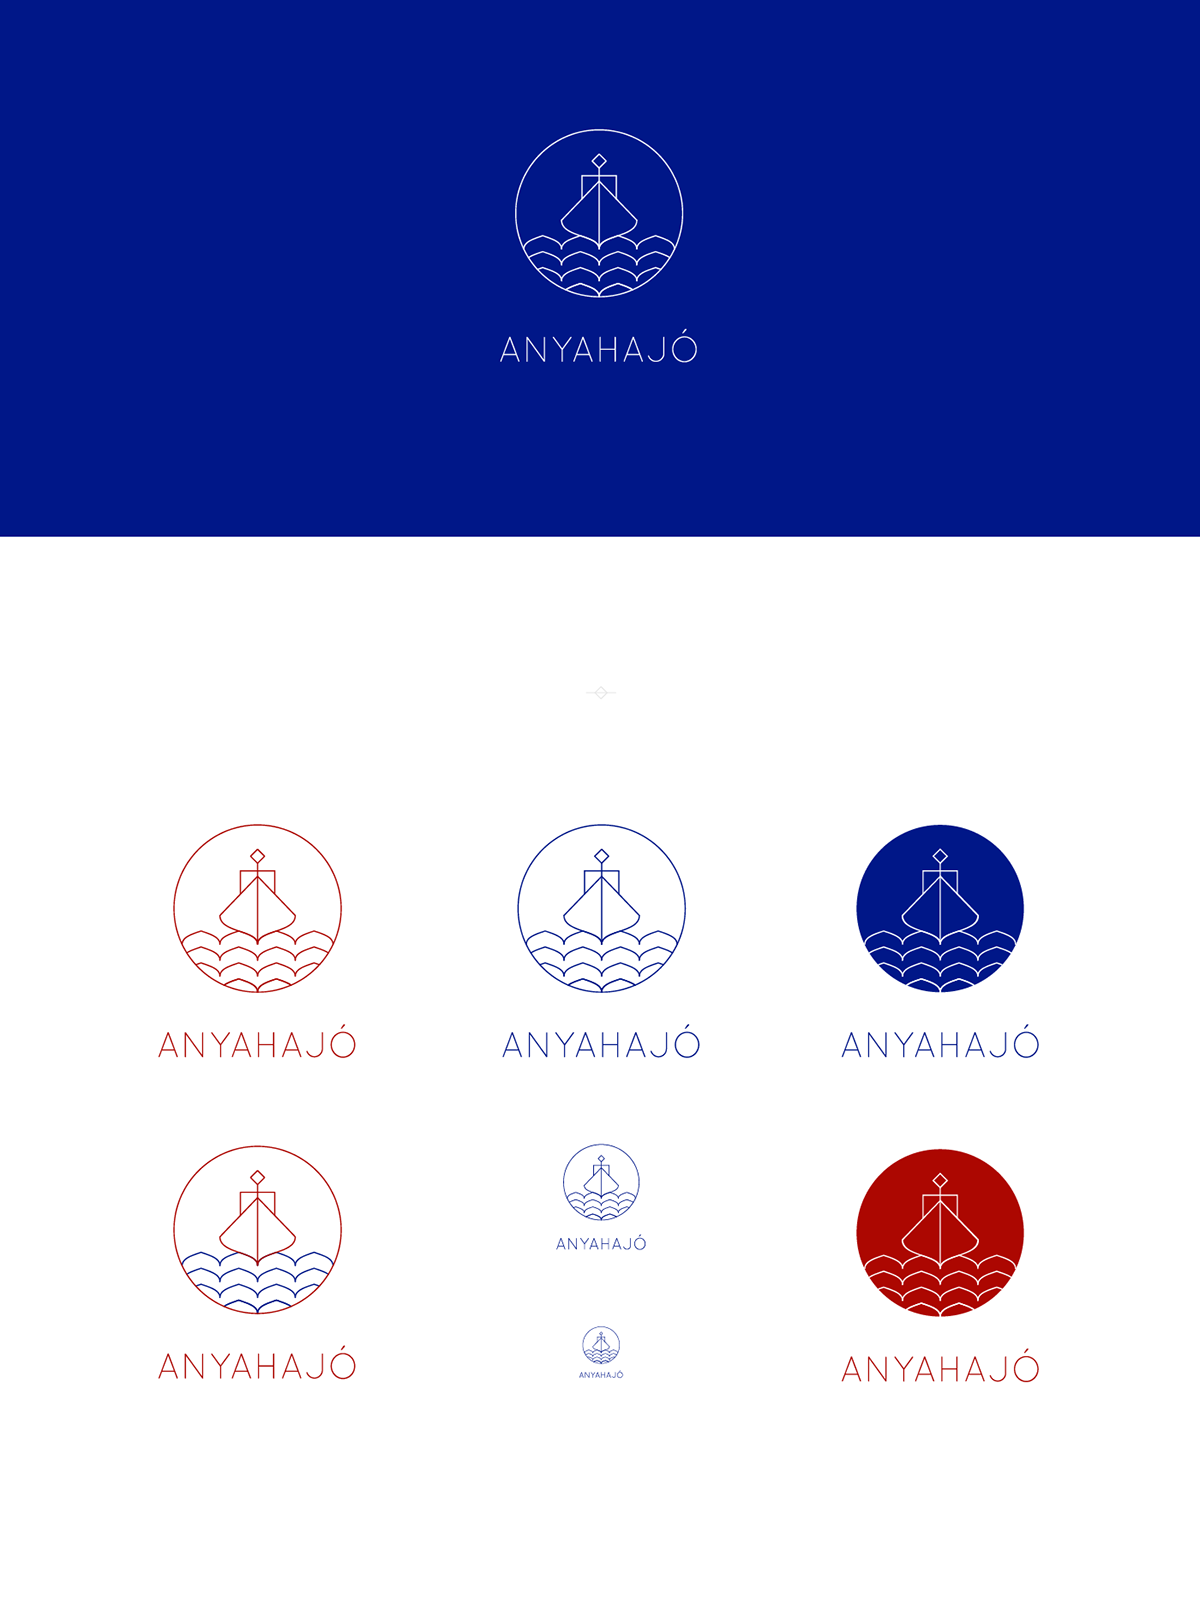 mothership mother ship logodesign logo budapest hungary blue anchor Competition Tender